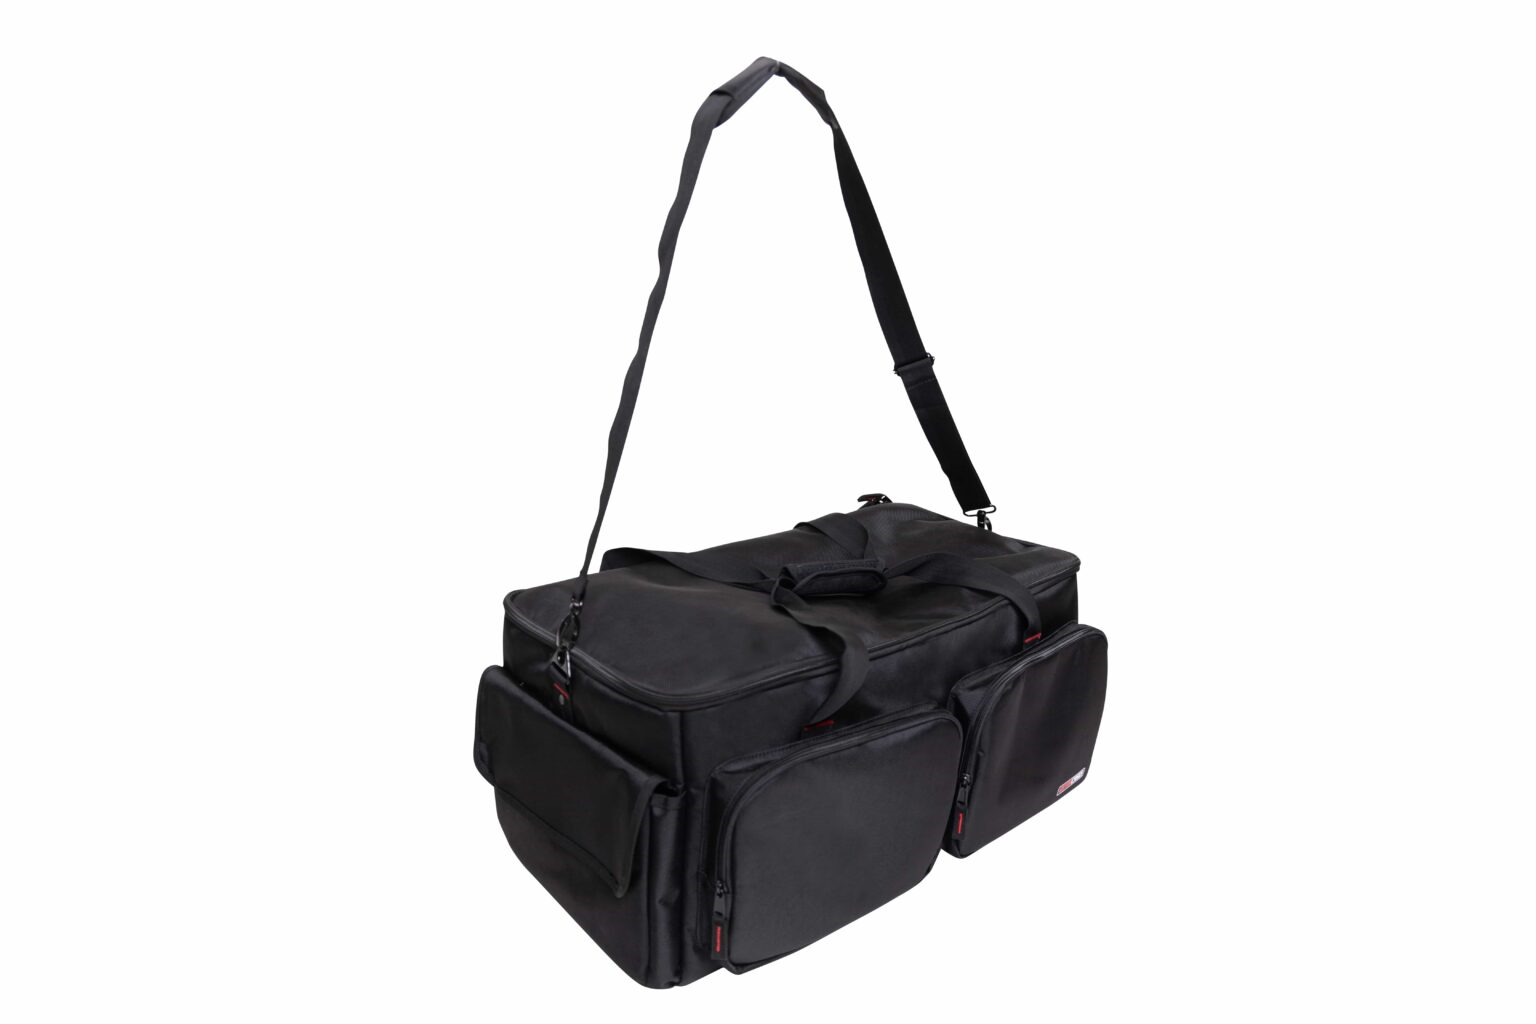 G-CABLEBAG-LG LG Cable & Accessory Organization Bag